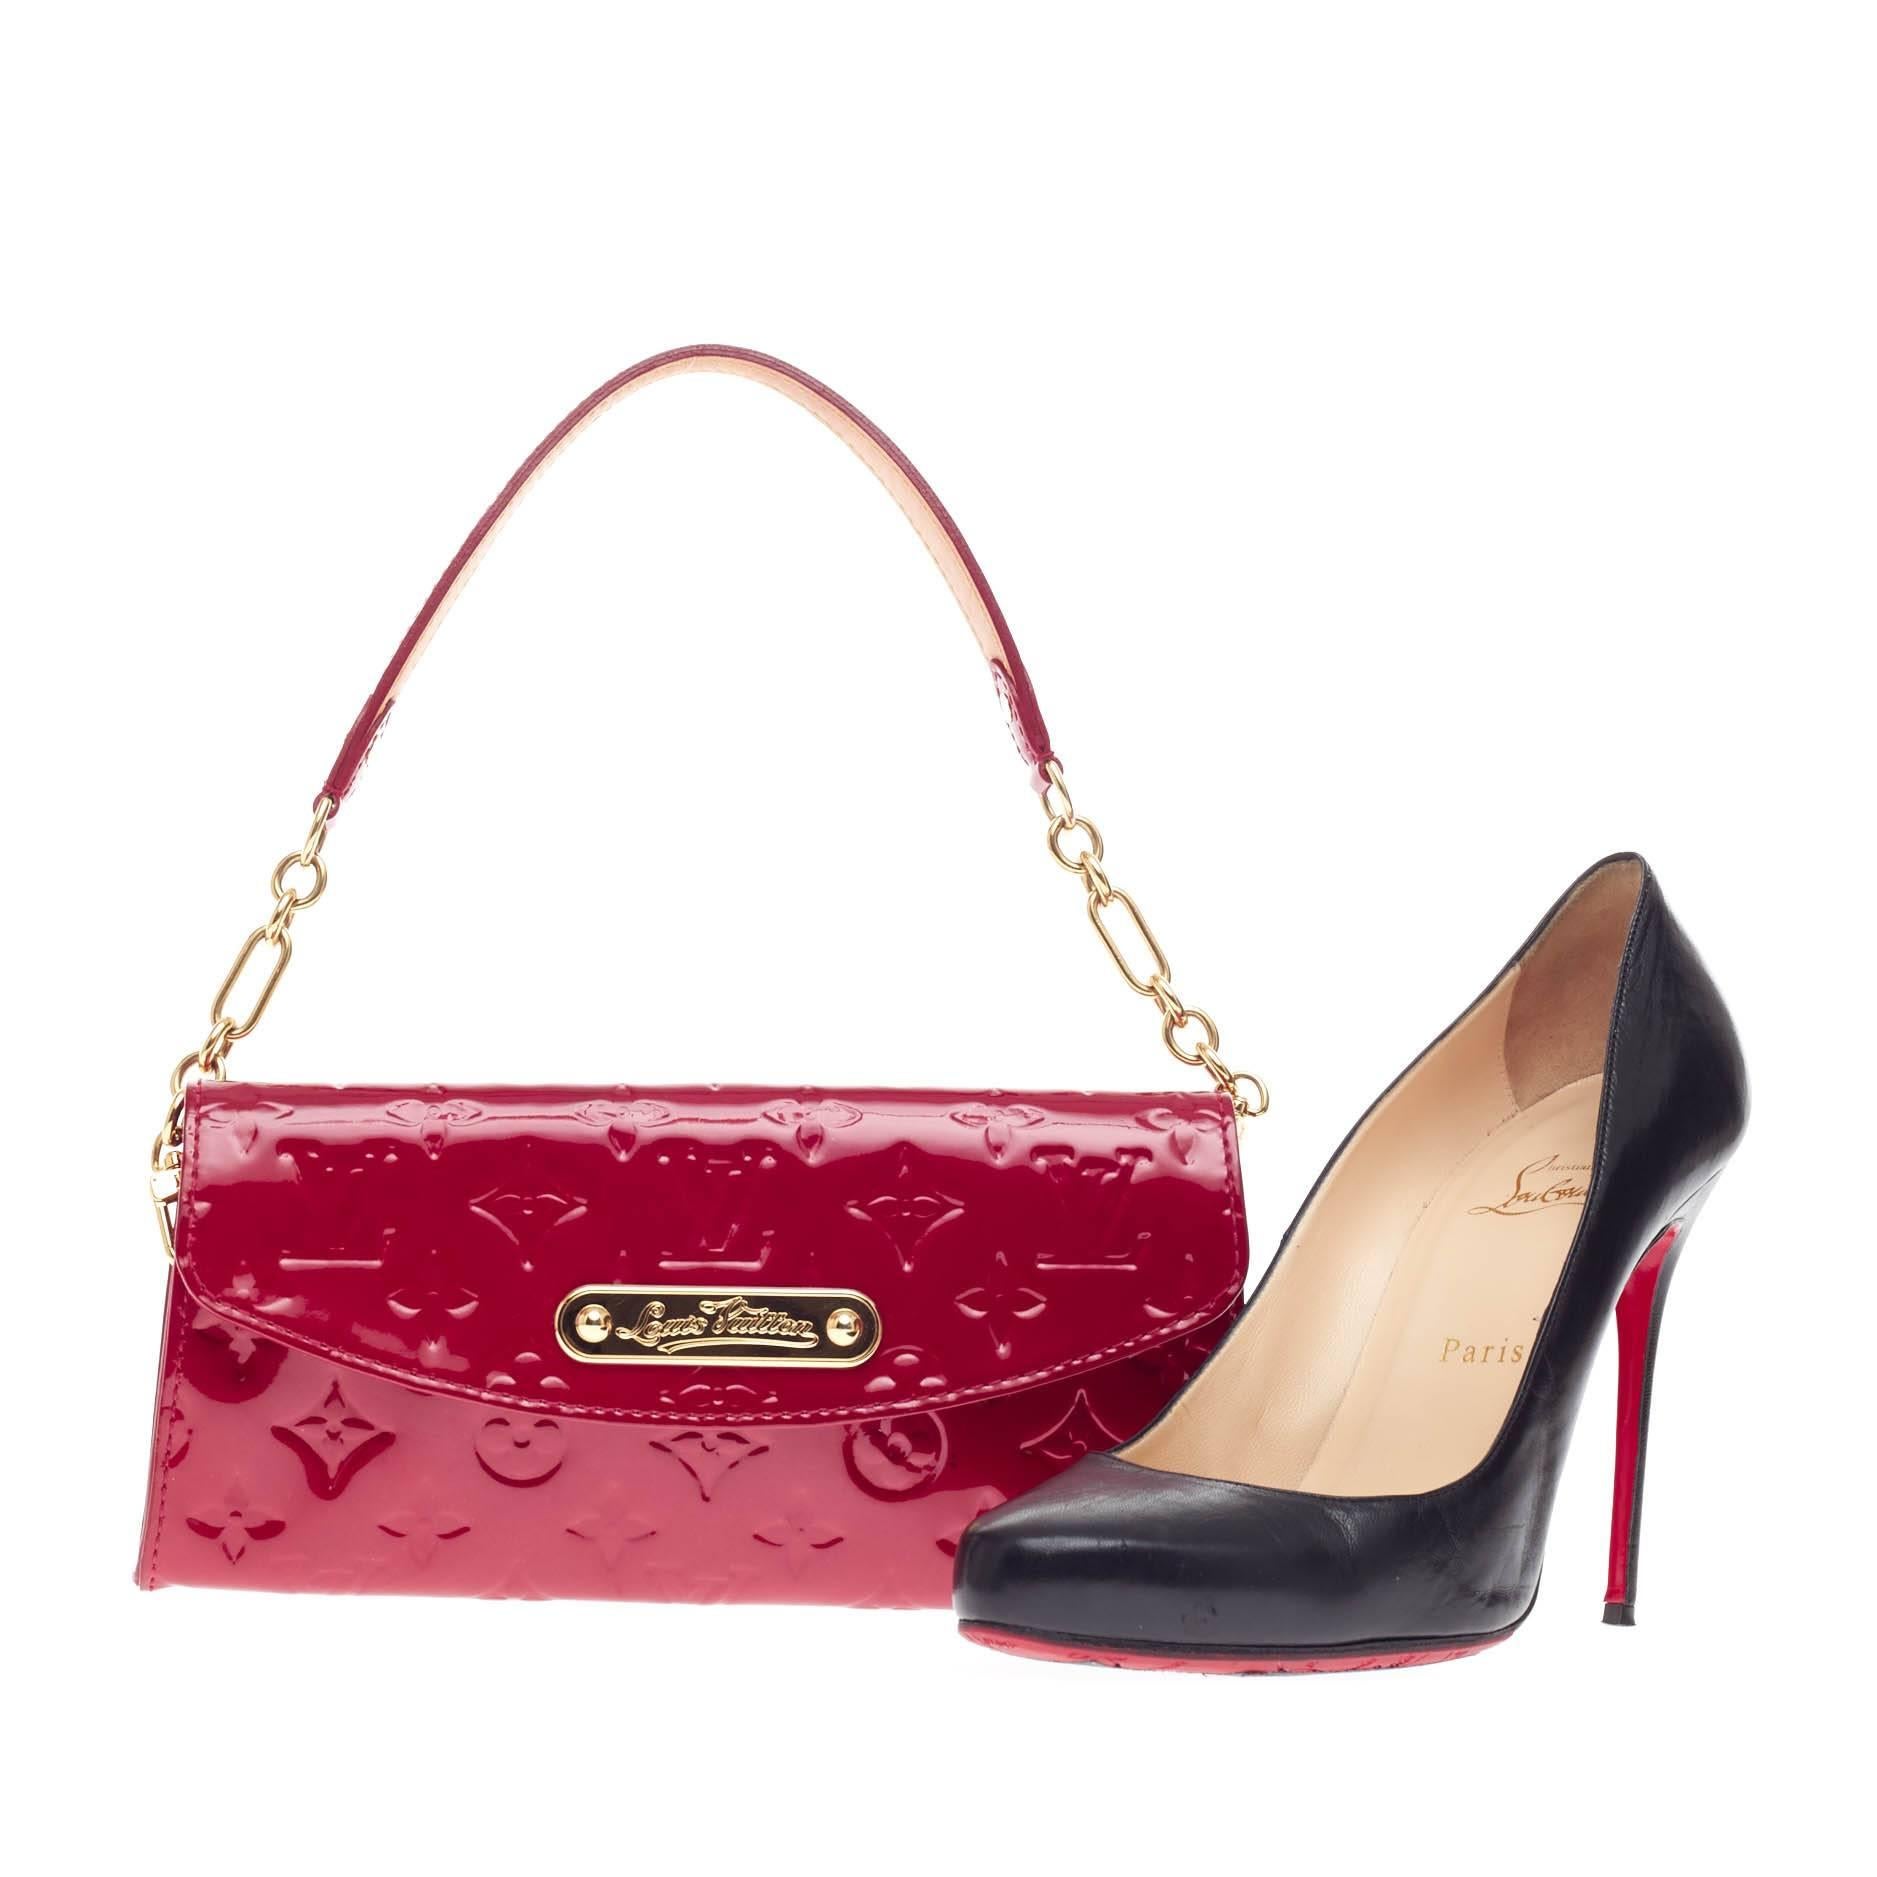 This authentic Louis Vuitton Sunset Boulevard Clutch Monogram Vernis is perfect for night outs. Crafted in stunning pomme d'amour red embossed monogram vernis, this clutch is accented with gold-tone hardware and removable chain link leather strap